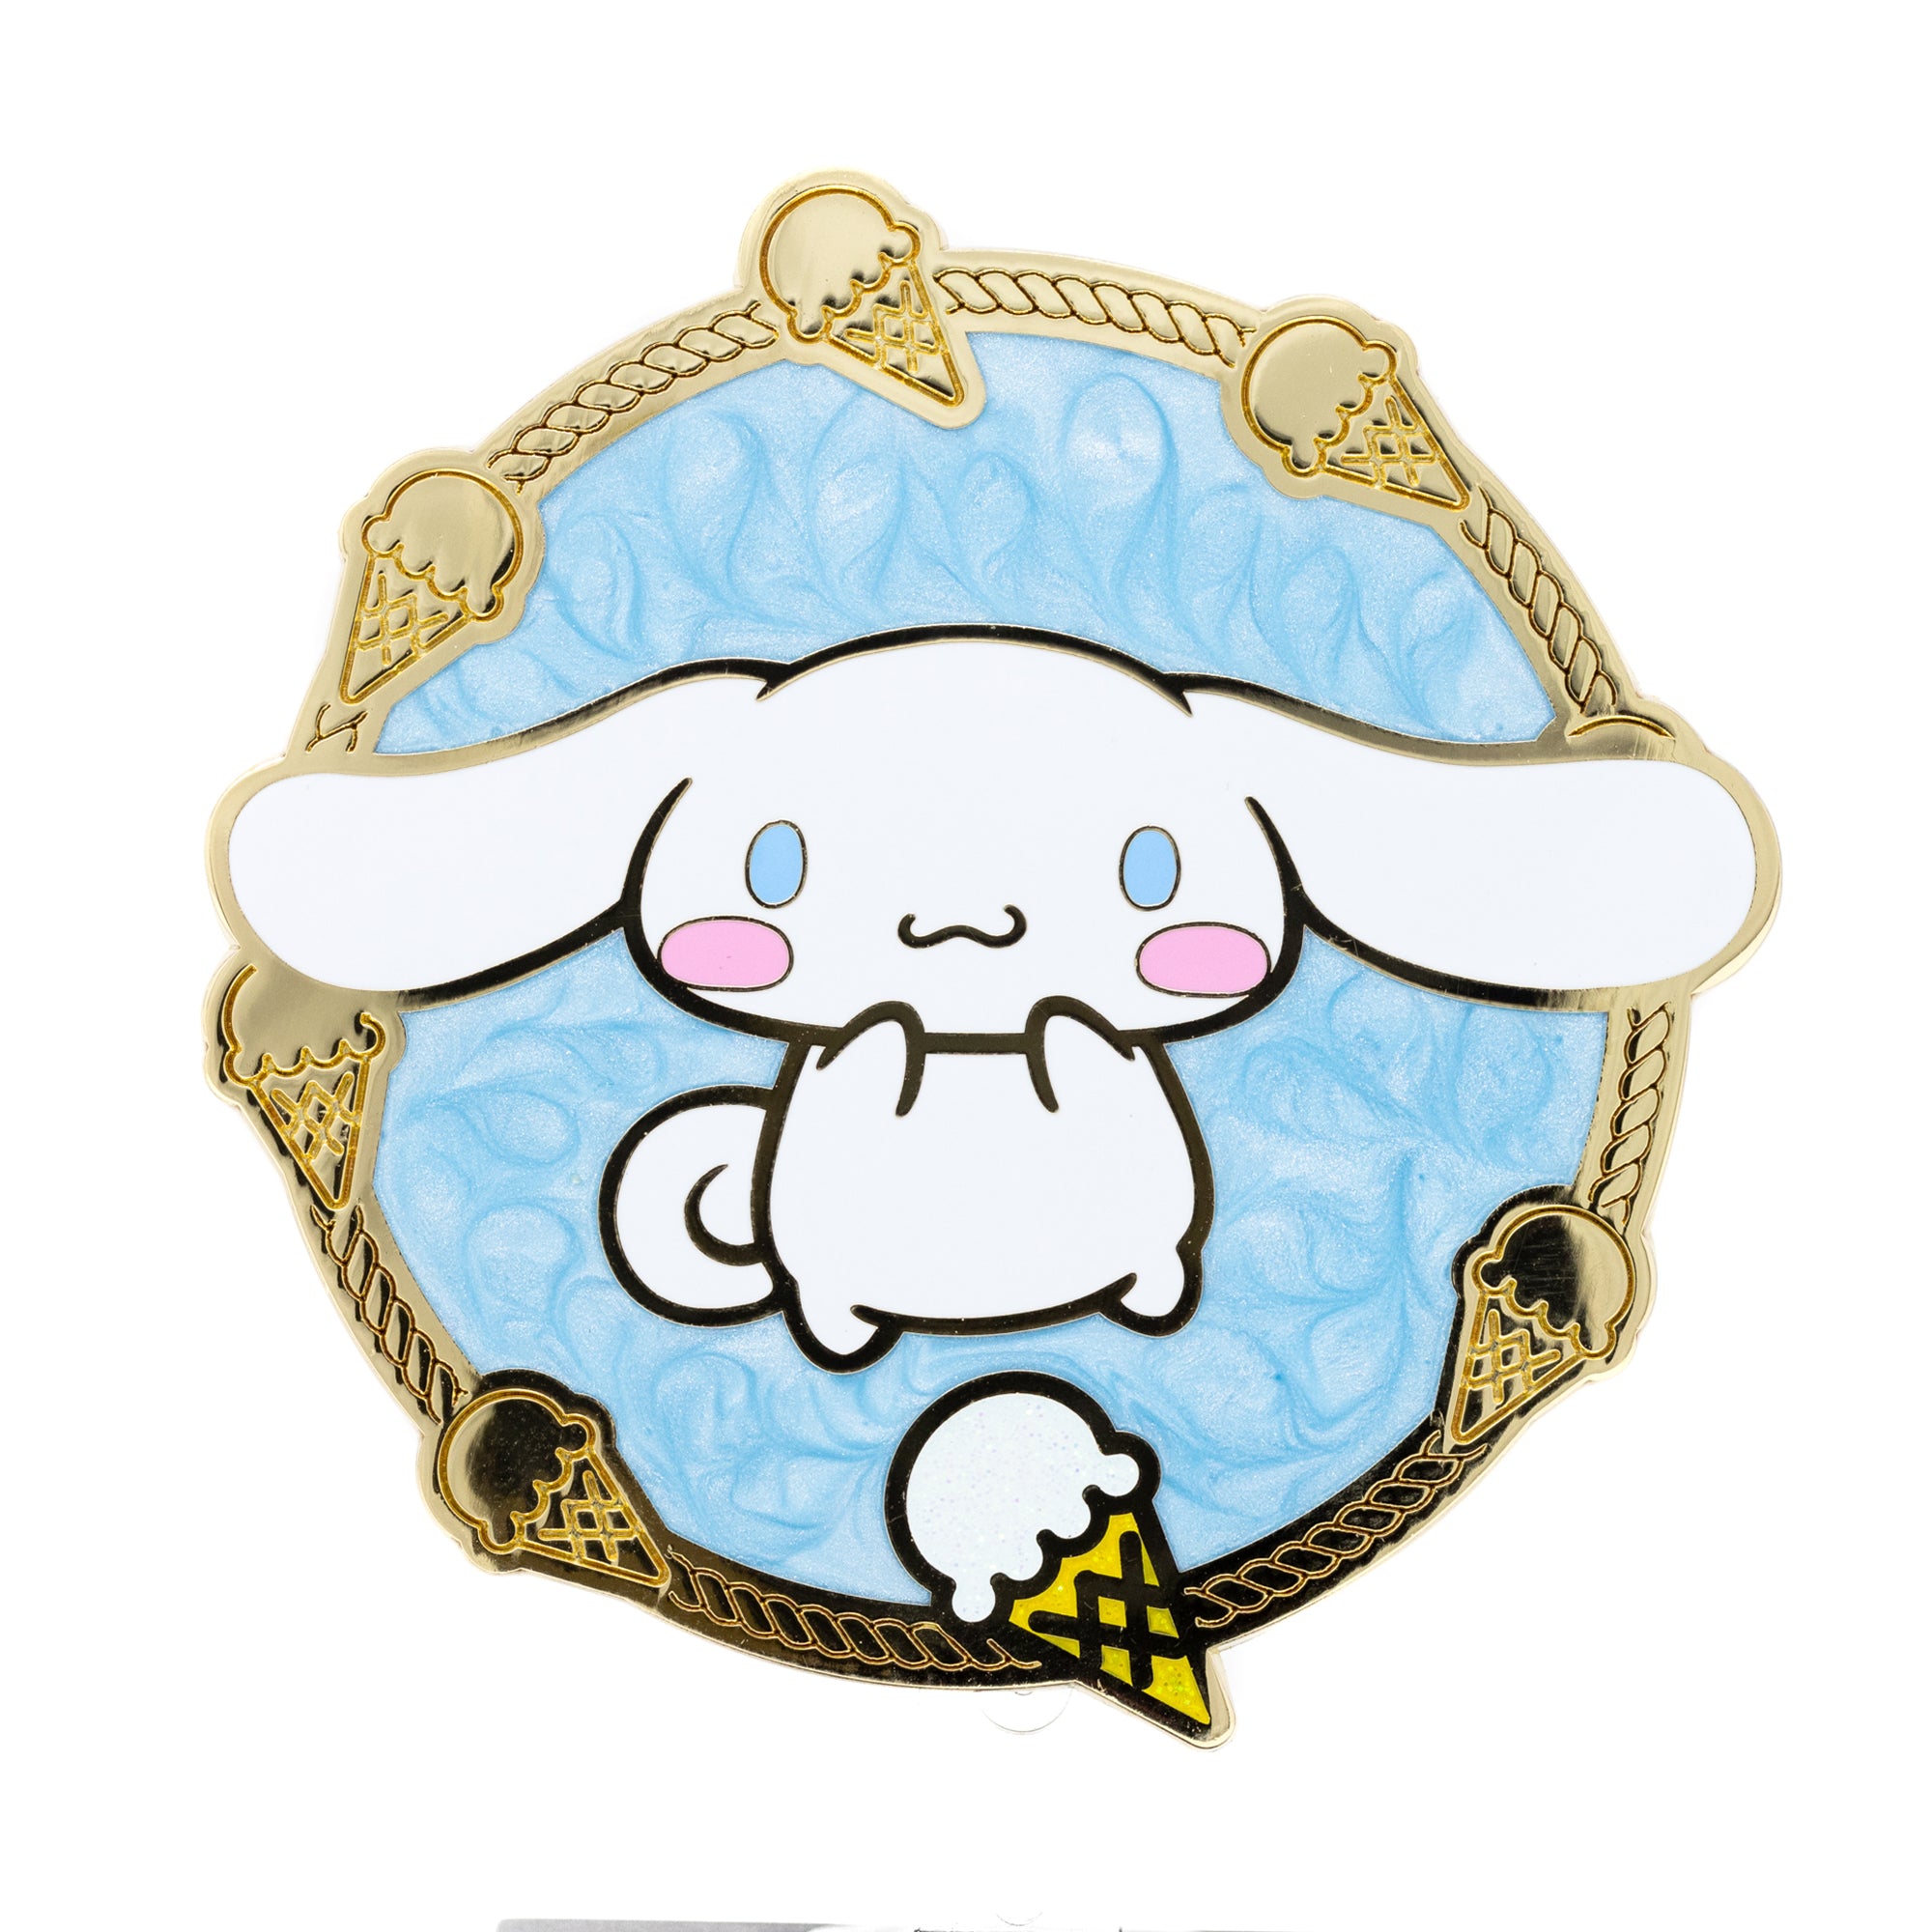 Sanrio Iconic Series - Cinnamoroll 3 Limited Edition 300 Pin - FINALSALE